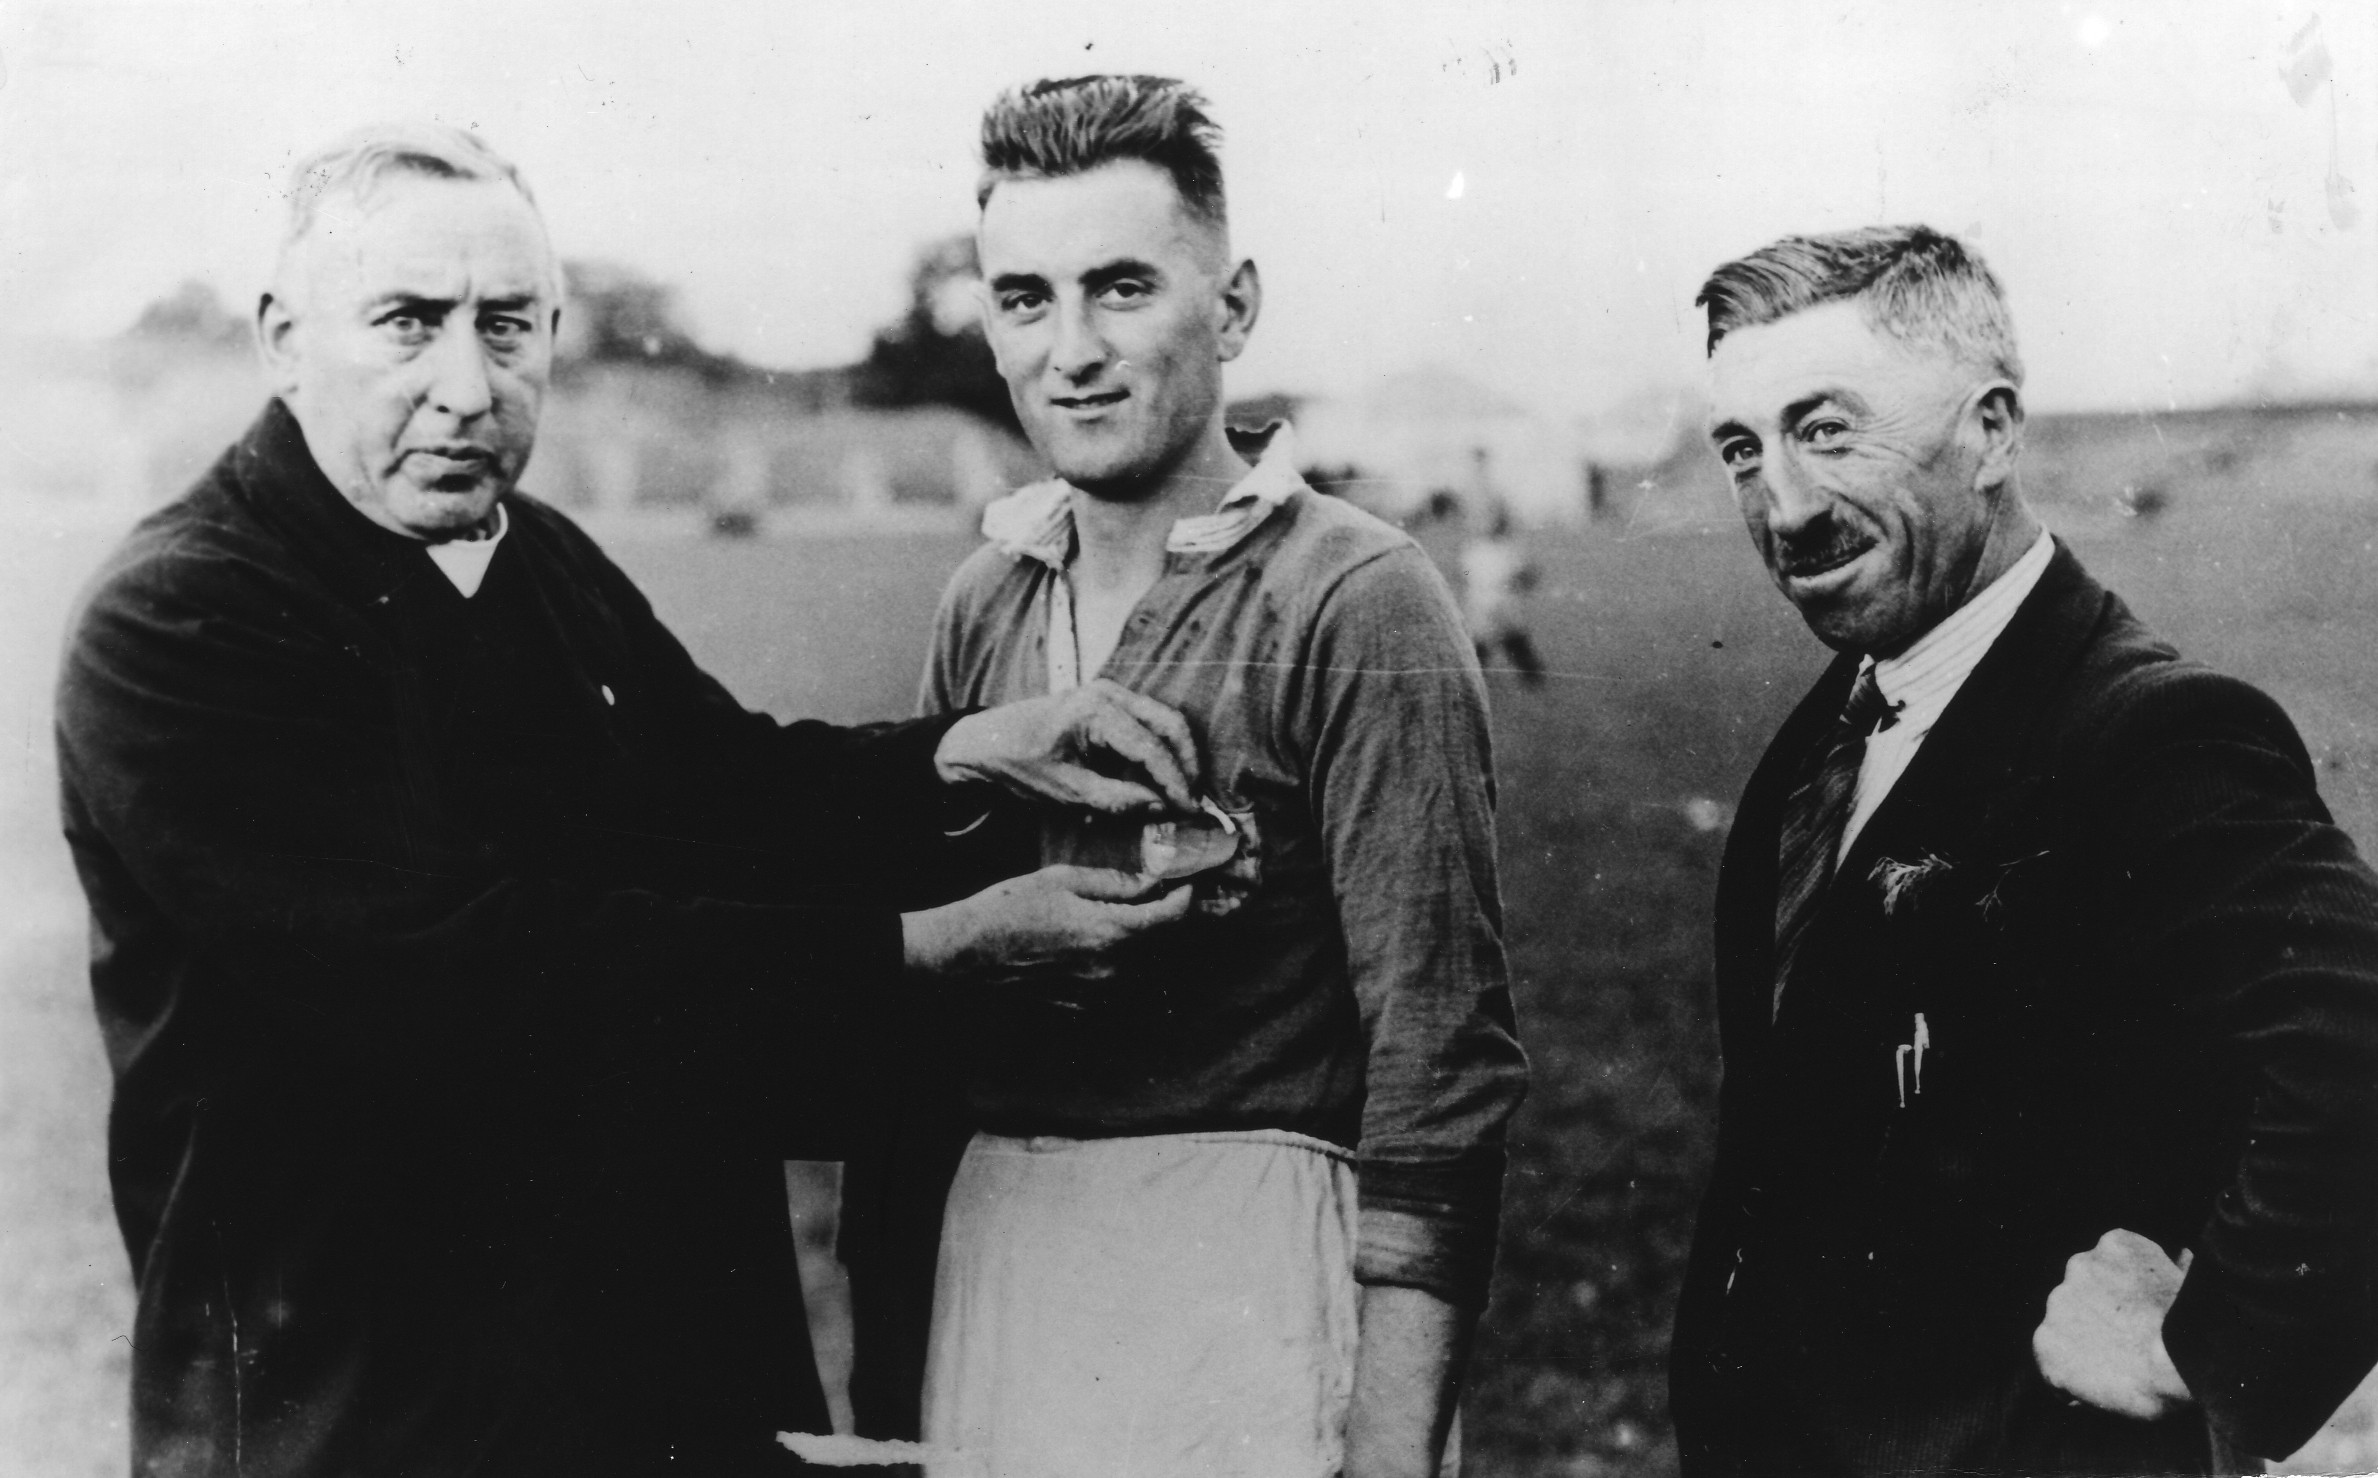 Fr JJ Meagher, Chairman of Tipperary County Board, makes a presentation to Jim Lanigan, captain of the 1937 Tipperary All-Ireland winning team. Also included is County Secretary Johnny Leahy.